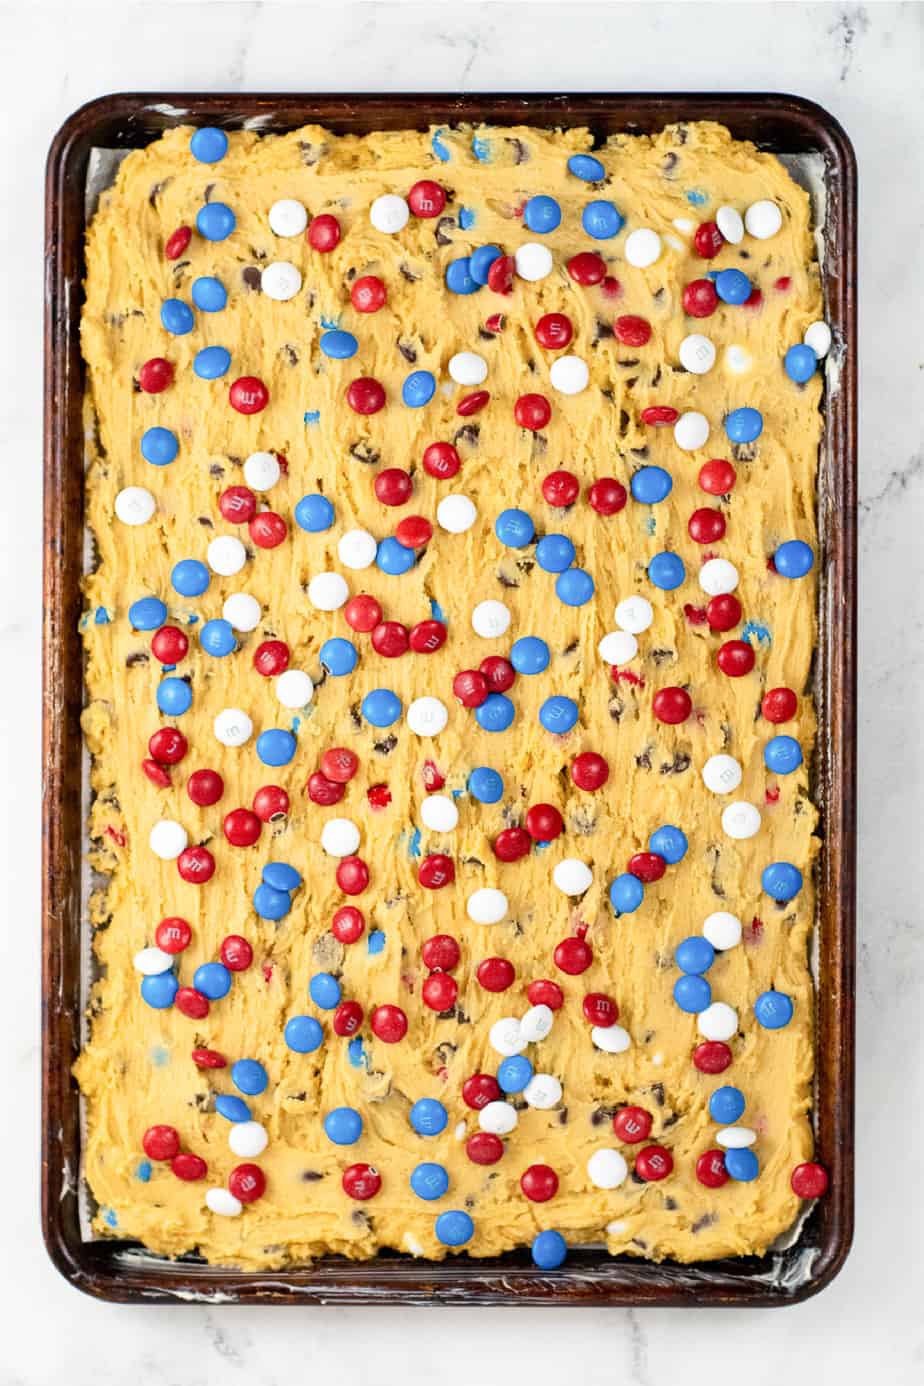 Cookie dough pressed into a baking pan topped with red, white and blue MM candies from above.